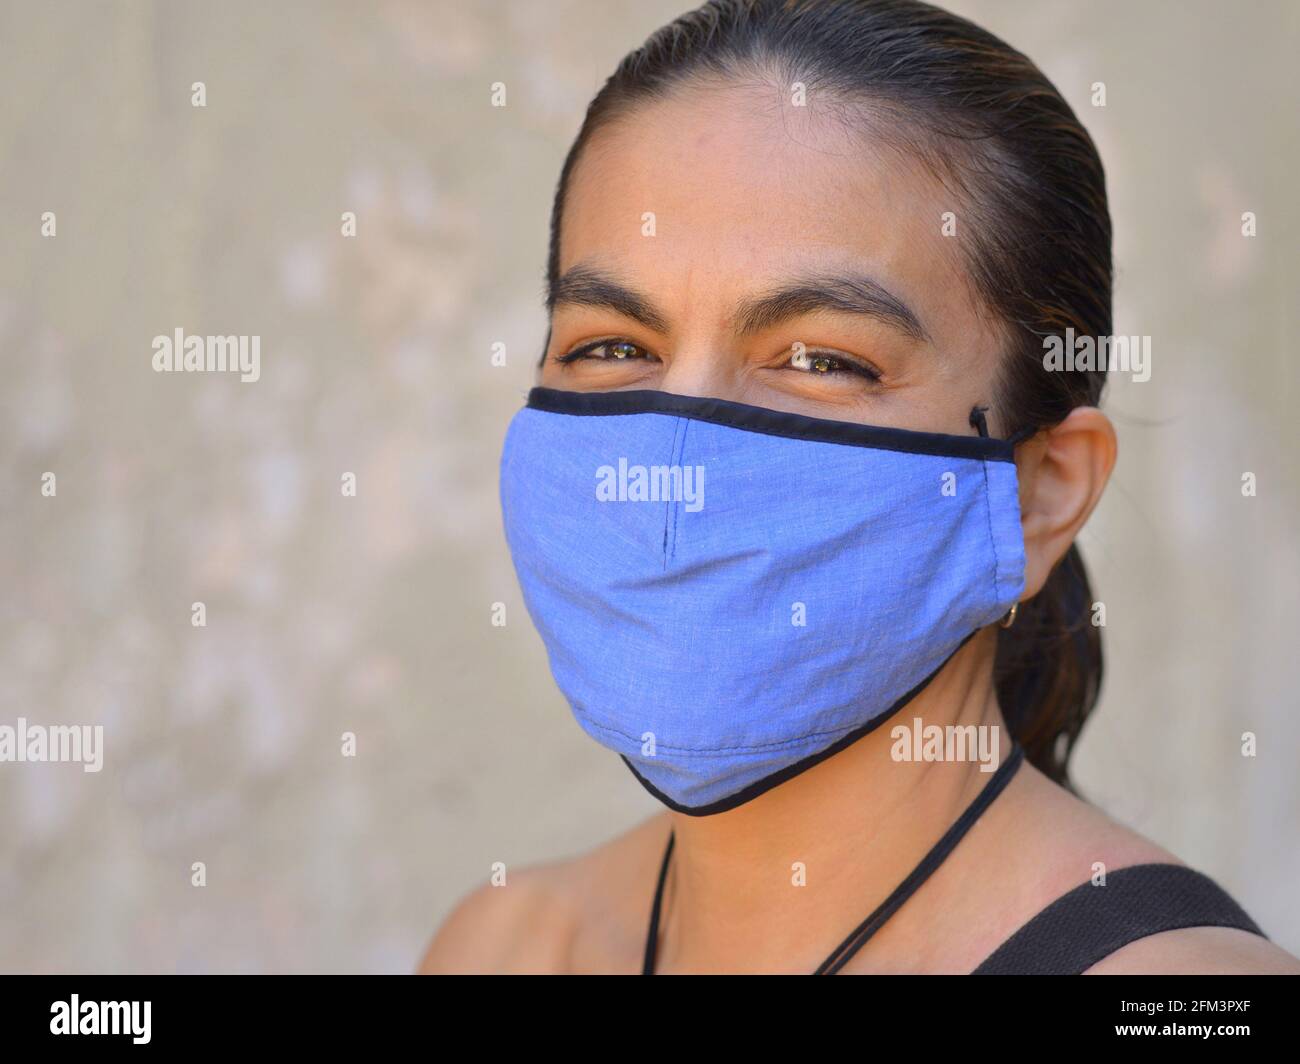 Resourceful Mexican latina woman with smiling eyes wears a blue non-medical face mask during the global coronavirus pandemic and poses for the camera. Stock Photo